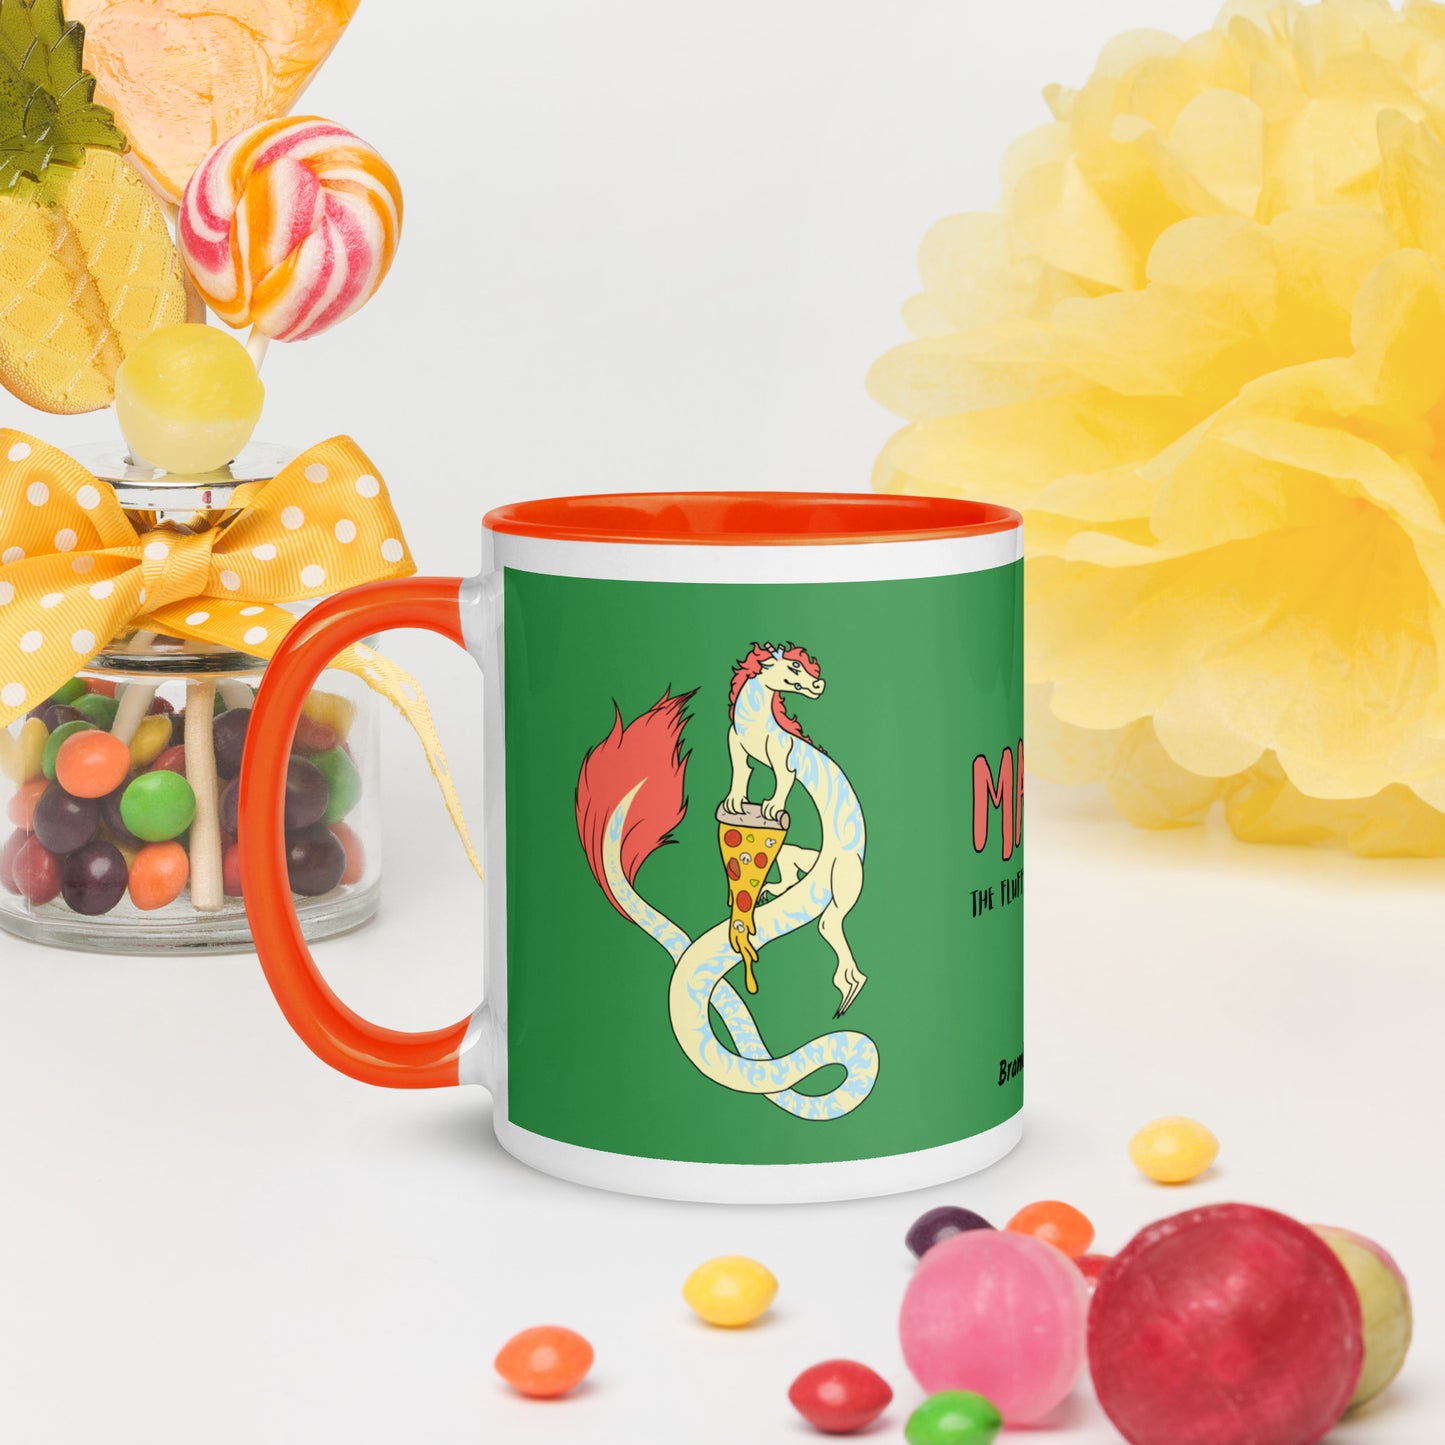 11 ounce white ceramic mug. Orange inside and handle. Features double-sided image of Maisy the Fuzzy Noodle Dragon with a slice of pizza. Shown surrounded by candies and decorations.